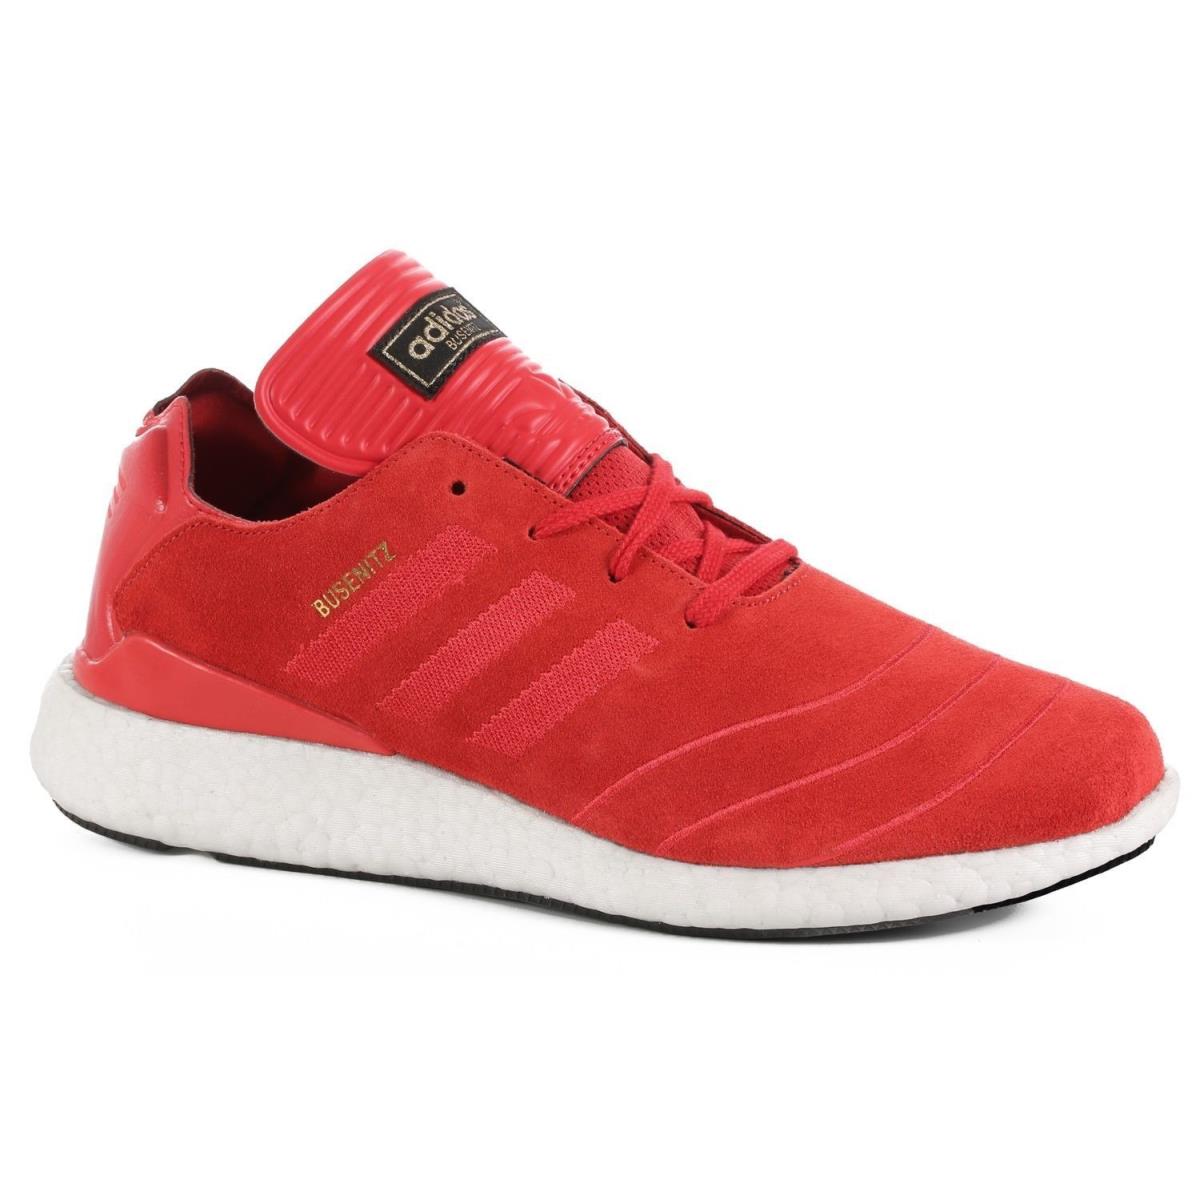 Adidas Busenitz Pure Boost Scarlet Red White F37885 351 Men`s Shoes - Scarlet